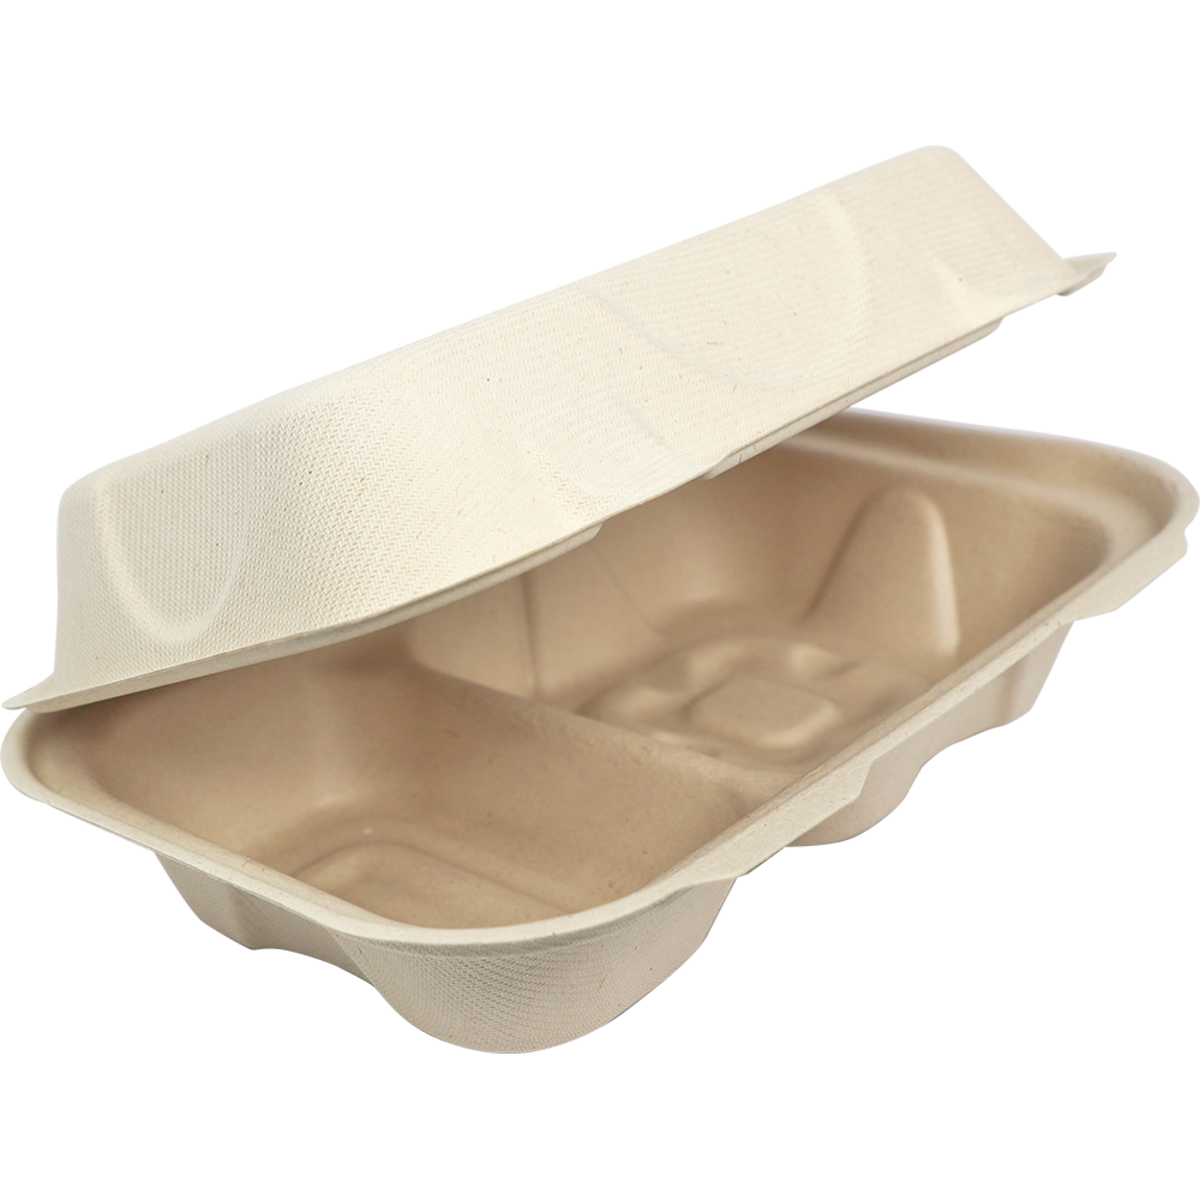 9" x 6" x 3" Clamshell Two Compartment | Natural Plant Fiber